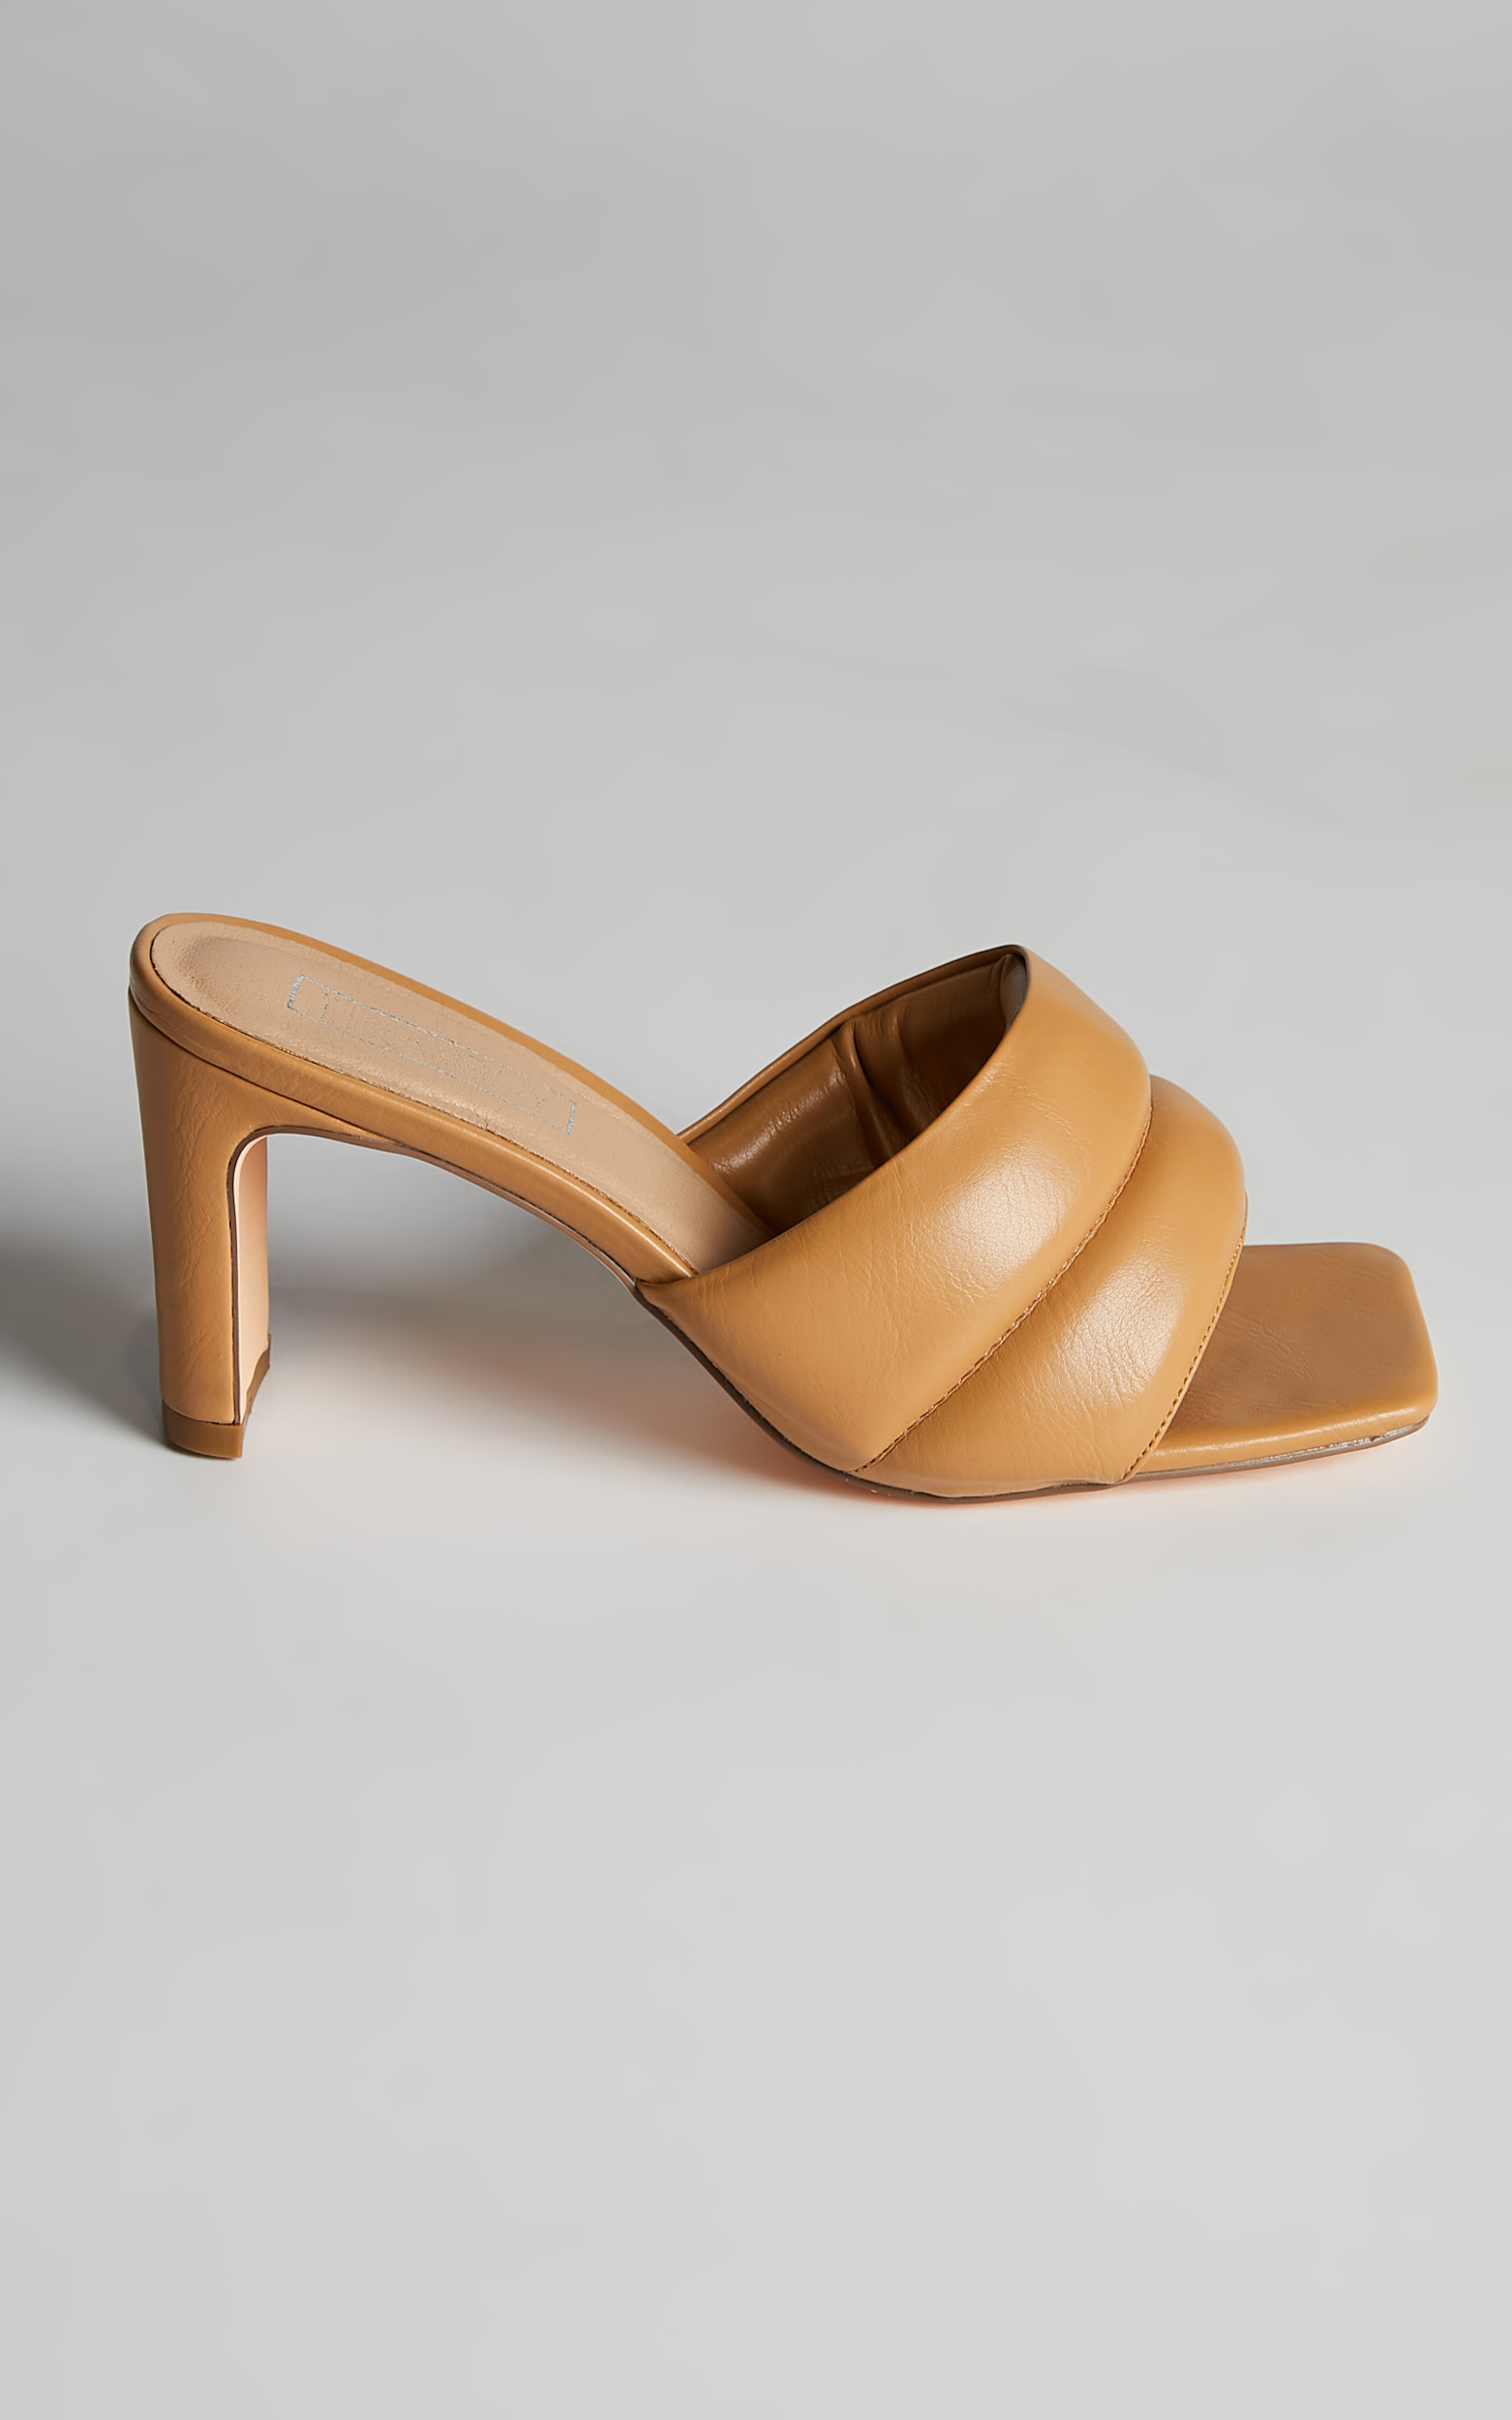 Therapy - Cat Heels in CARAMEL - 05, BRN1, hi-res image number null